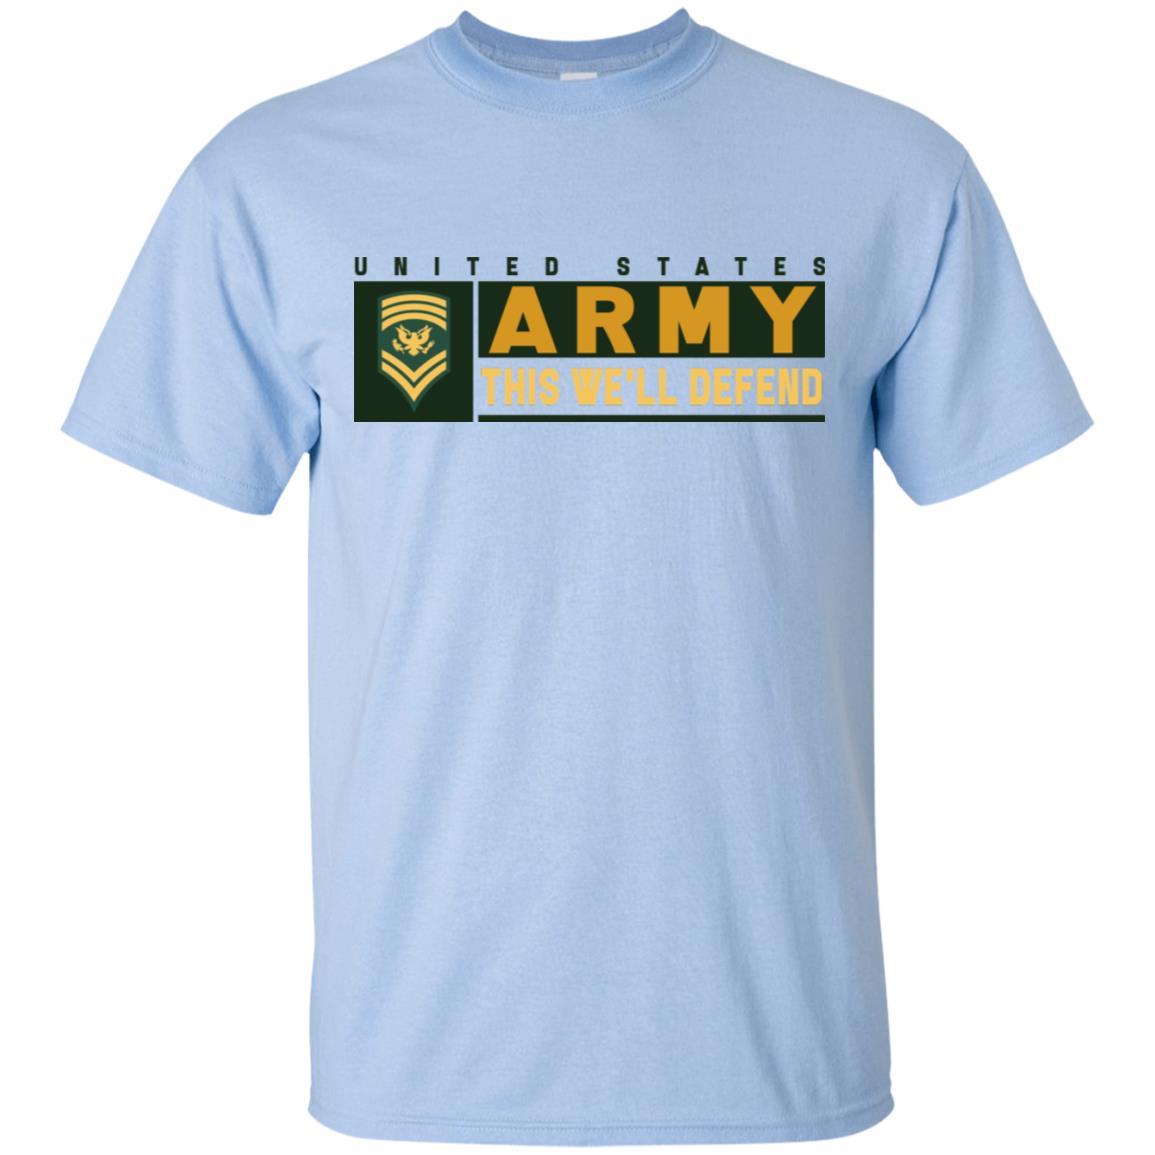 US Army E-9 SPC This We Will Defend T-Shirt On Front For Men-TShirt-Army-Veterans Nation